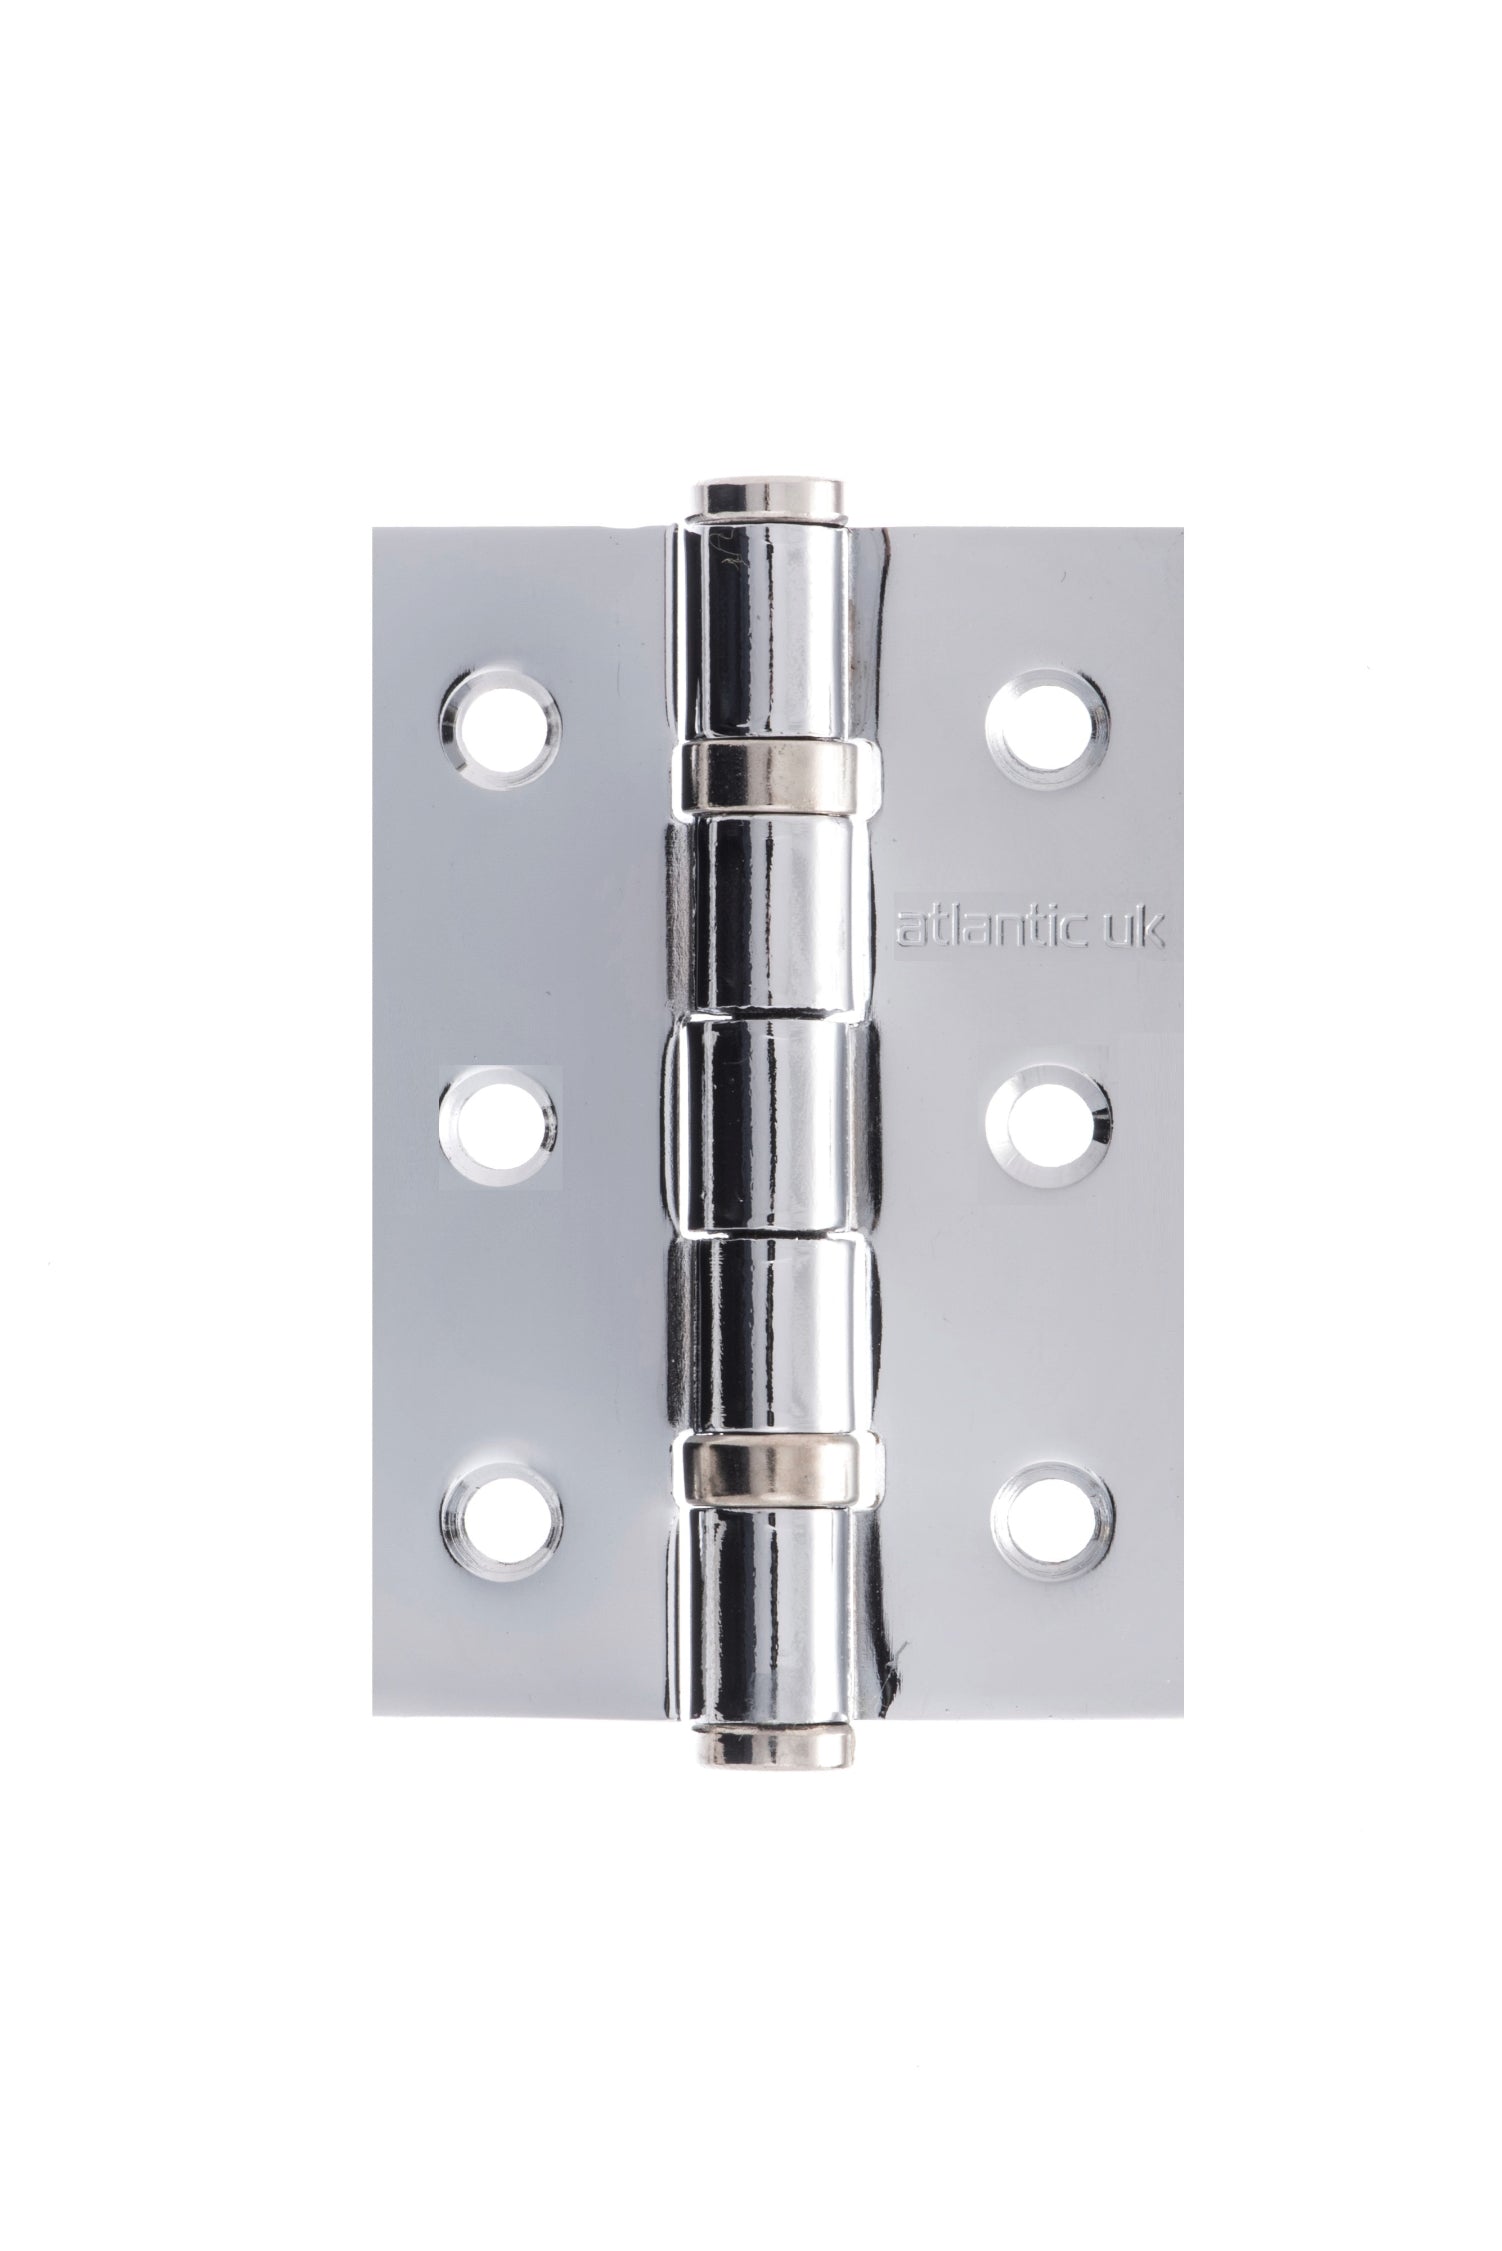 Atlantic CE FIRE RATED Ball Bearing Hinges 3" x 2" x 2mm - Polished Stainless Steel